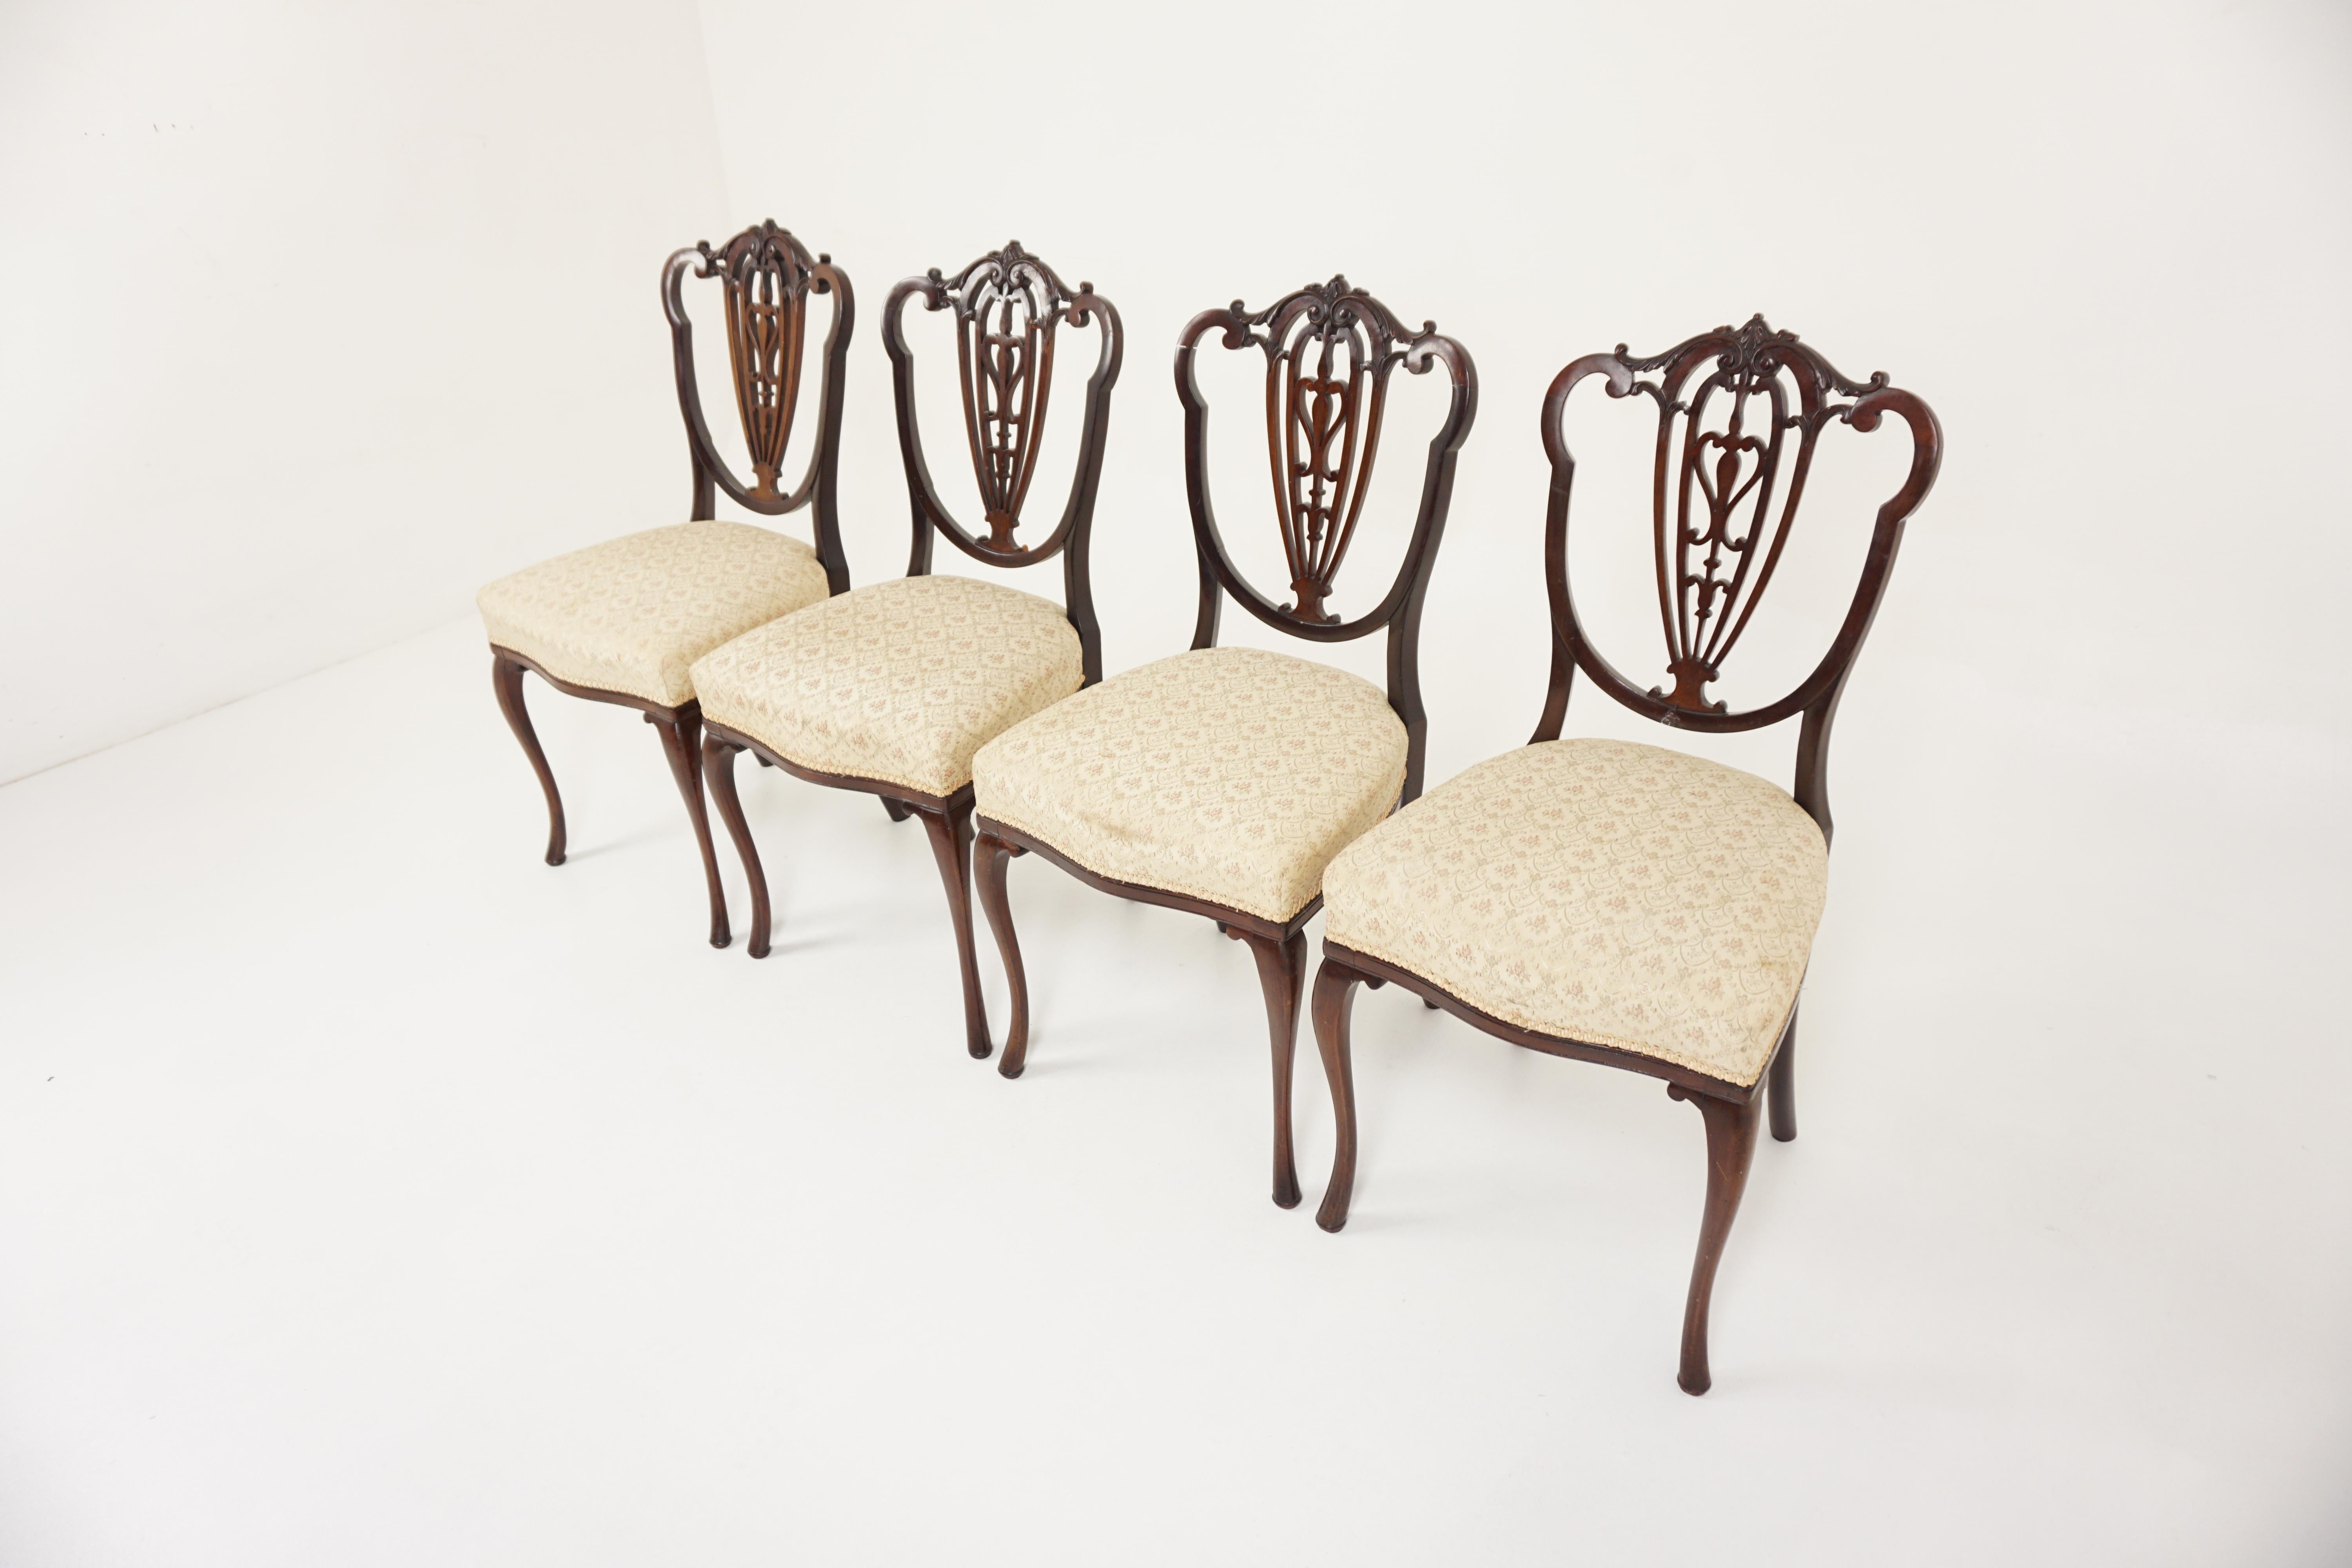 4 Antique Victorian Upholstered dining chairs, Scotland 1890, H763

Scotland 1890
Solid Walnut
Original Finish
Shaped top rail with open carved piece back splat
Large, upholstered seat
All standing on tall cabriole legs
Very clean and all